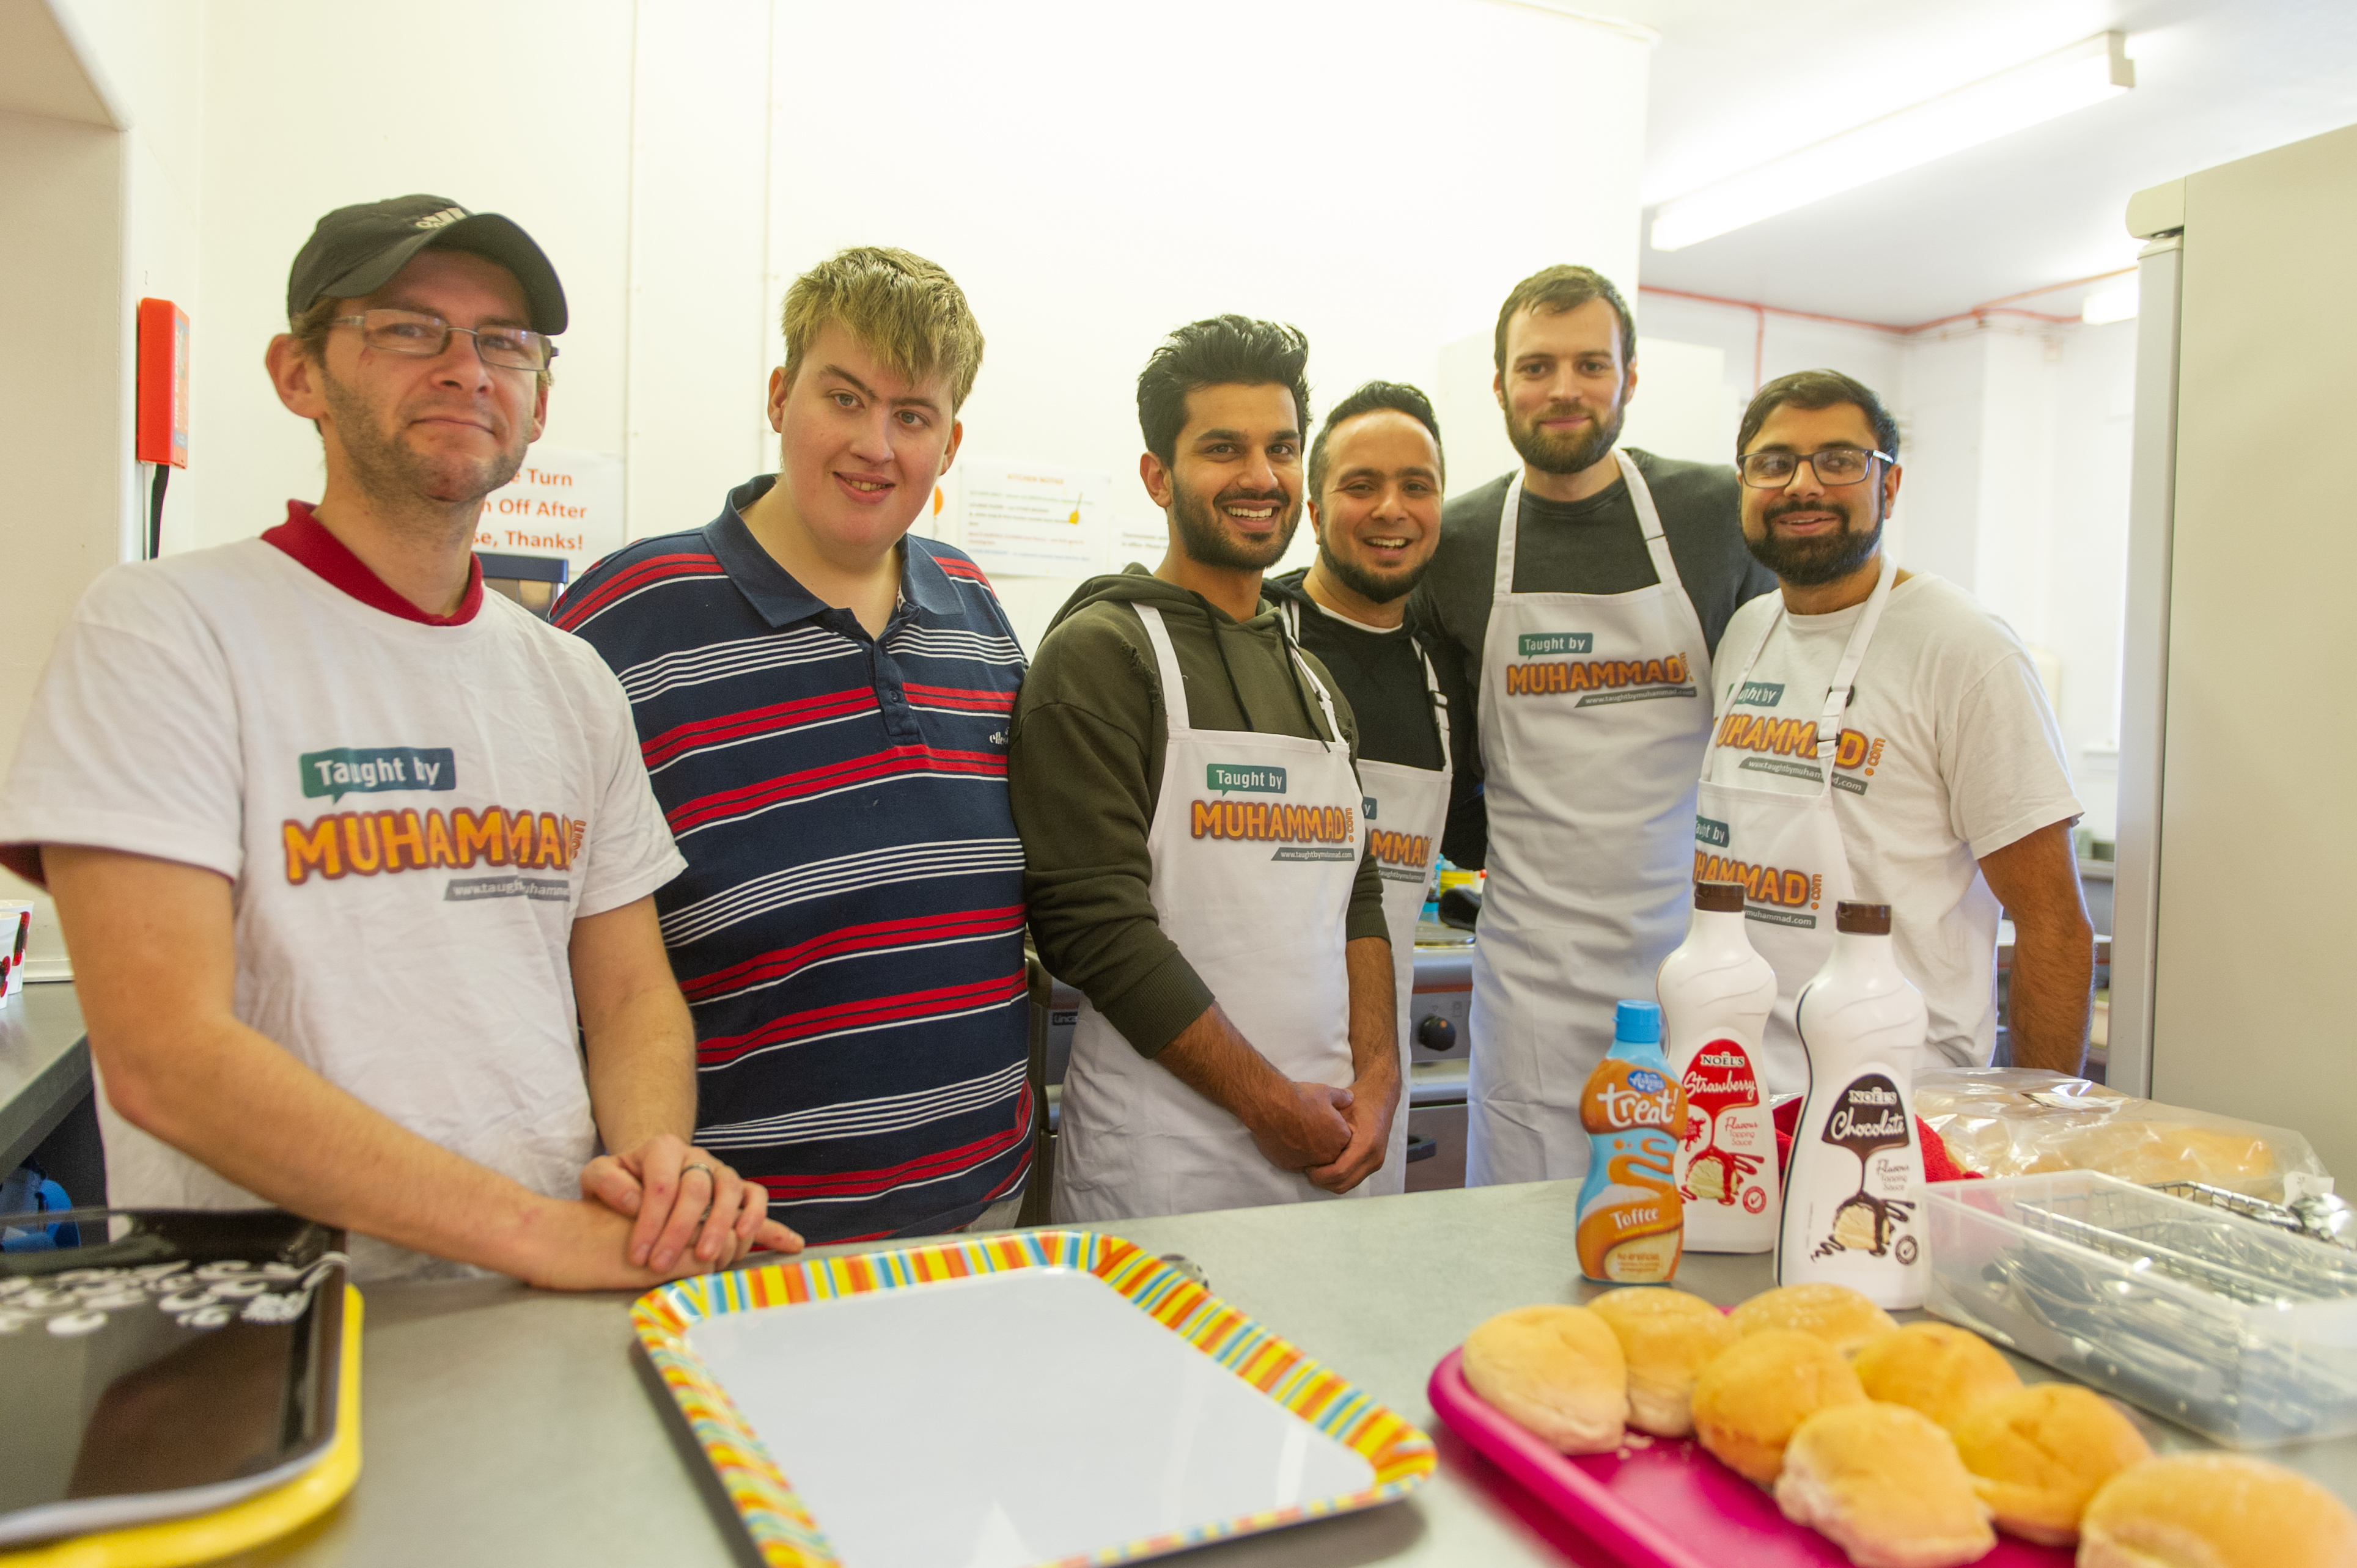 The Taught by Muhammed Kirkton support cafe in action - l to r - volunteers - Kevin Marnie and Stevie Lee, with volunteers and project managers within the organisation - Umer Farooq, Faisal Hussein, Isa Mallick and Rizwan Rafik.